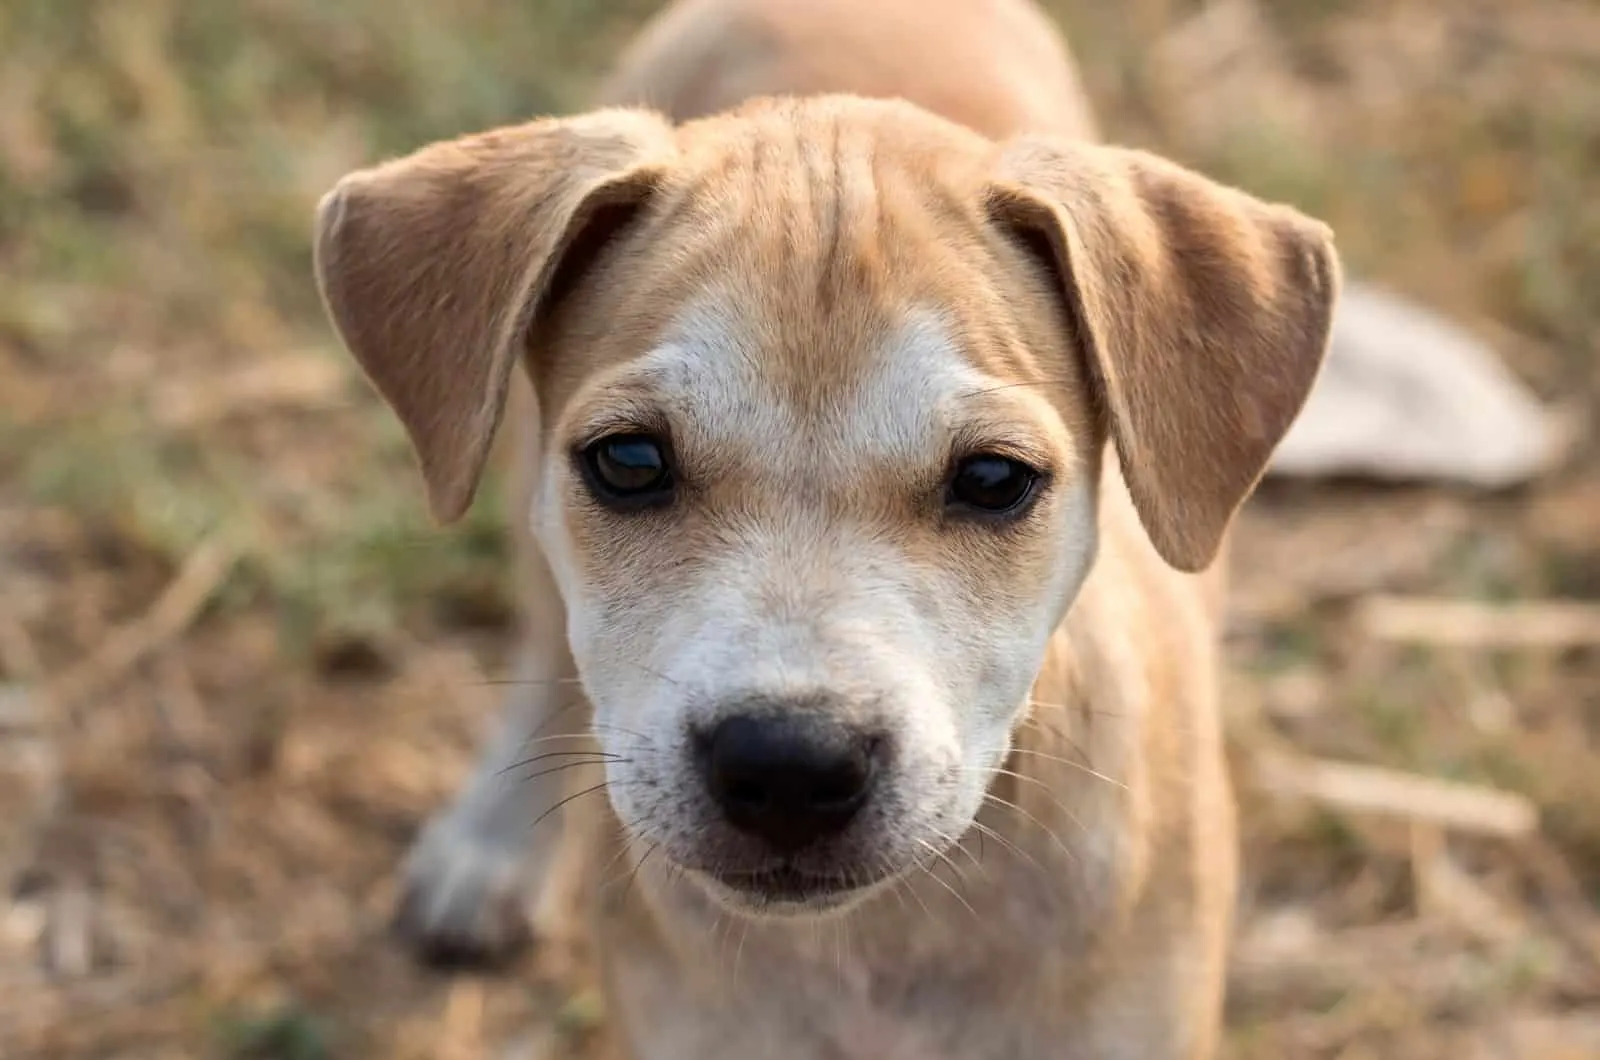 The Black Mouth Cur Pit Mix puppy